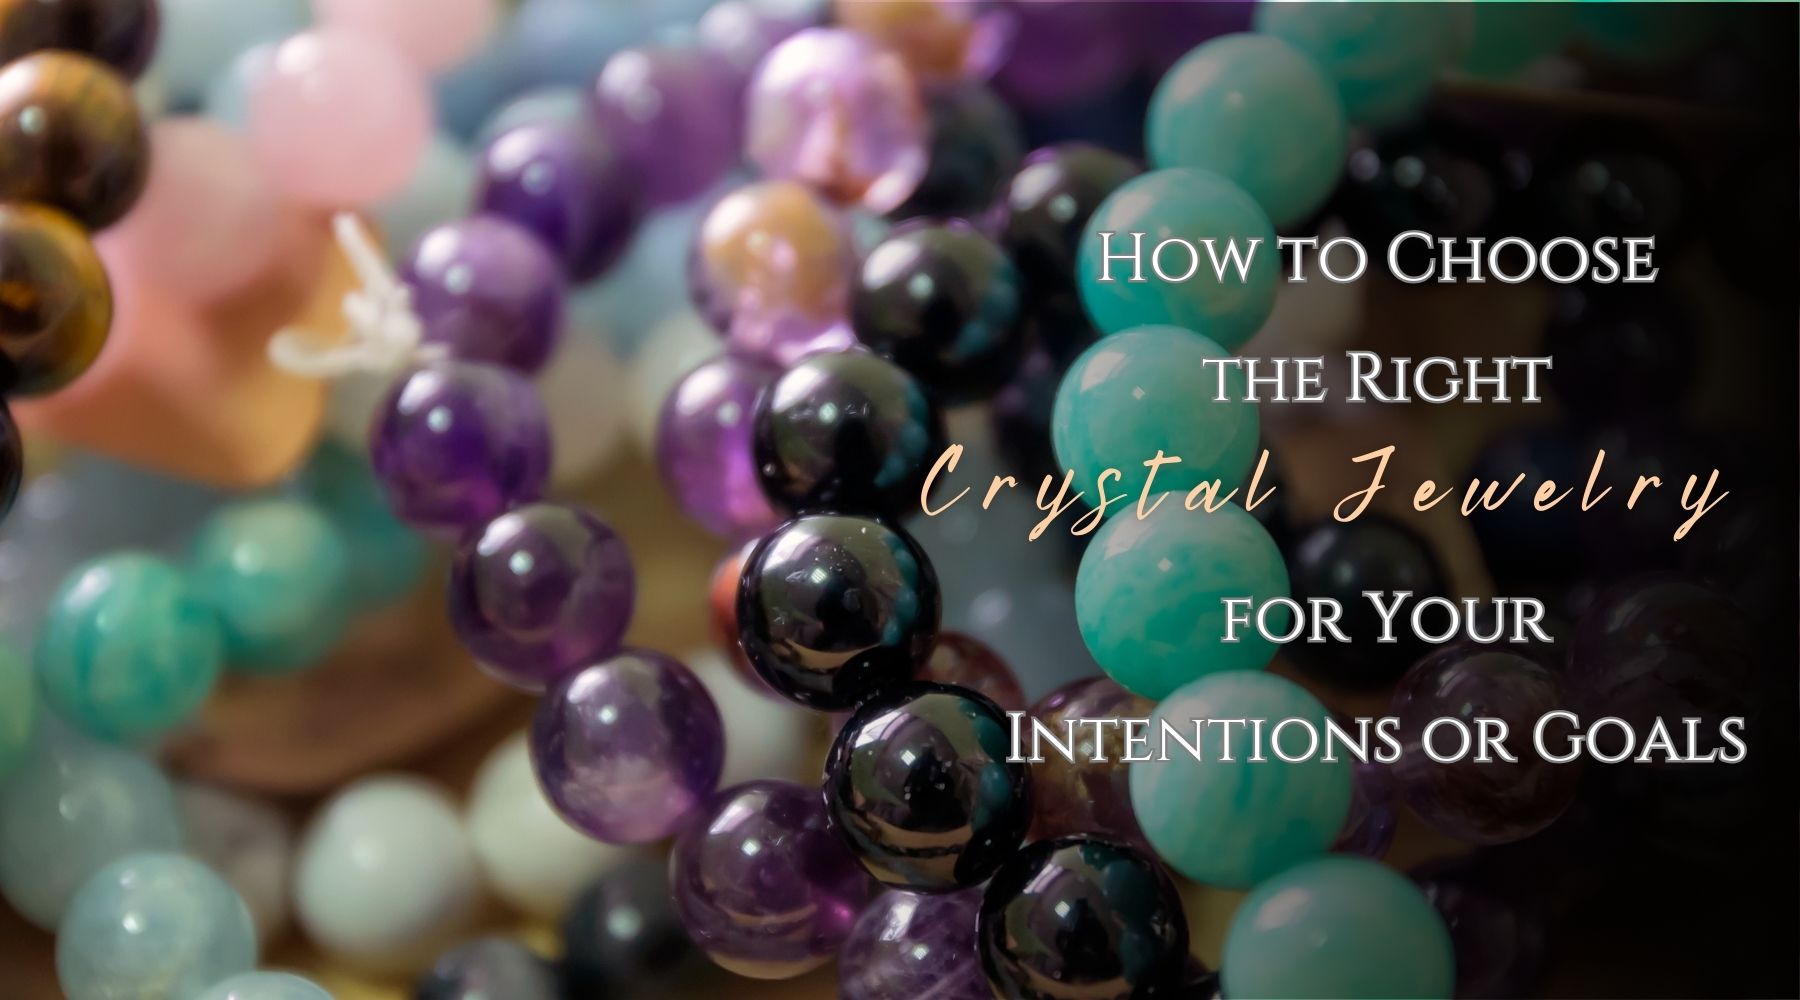 How to Choose the Right Crystal Jewelry for Your Intentions or Goals